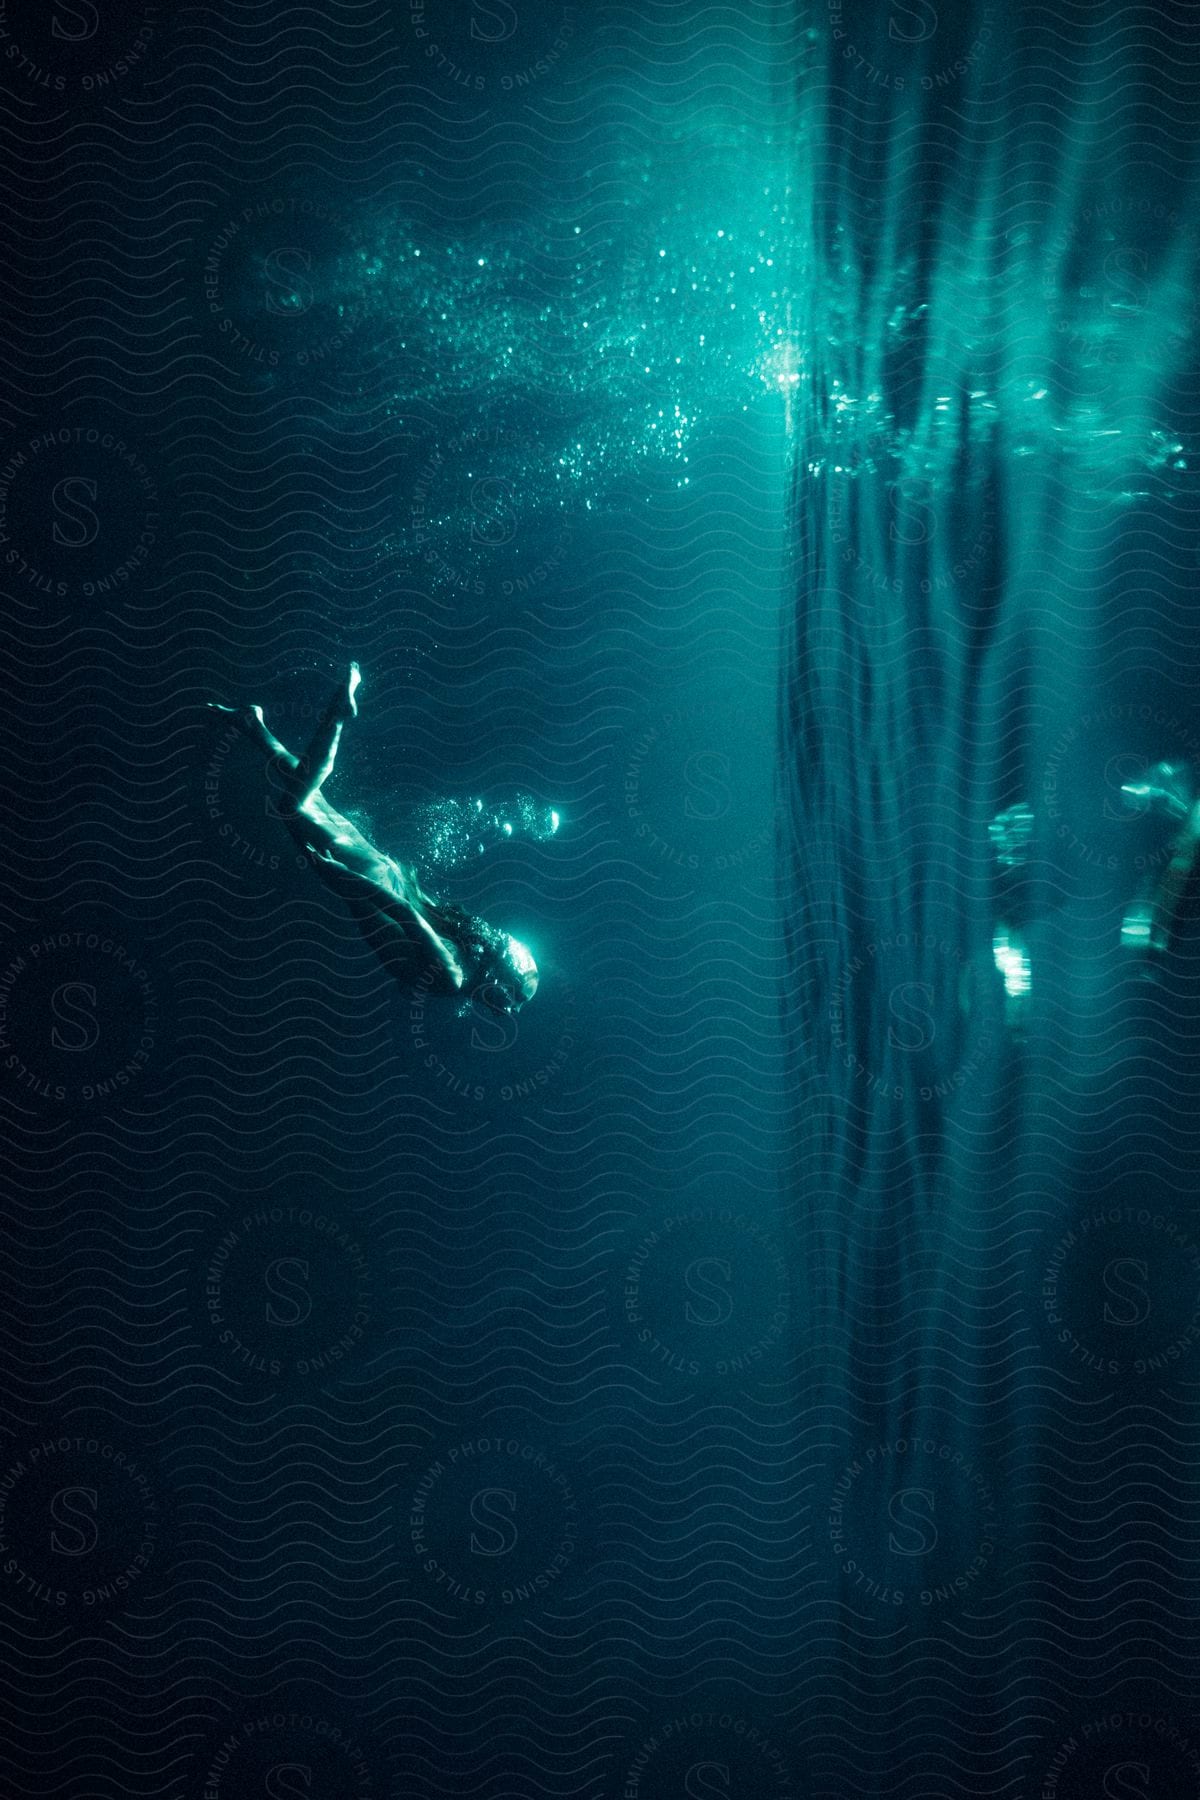 A woman swimming underwater in a pool